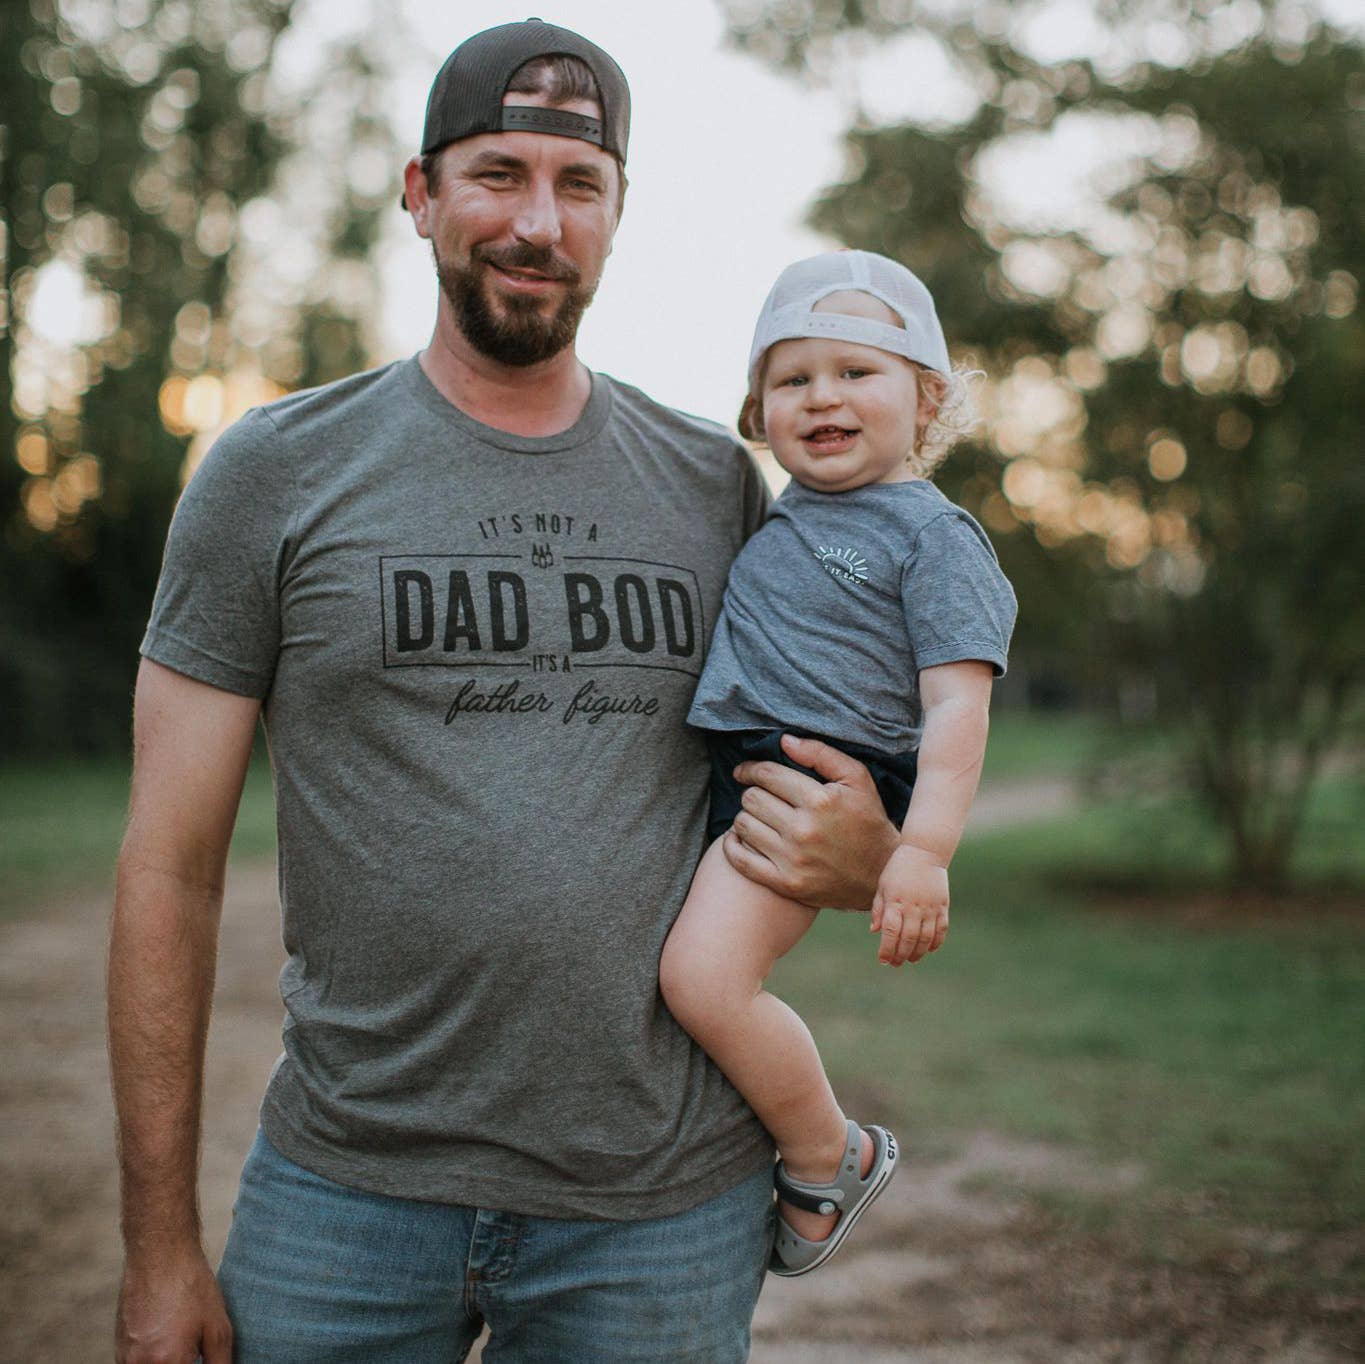 It's Not a Dad Bod Funny Shirt